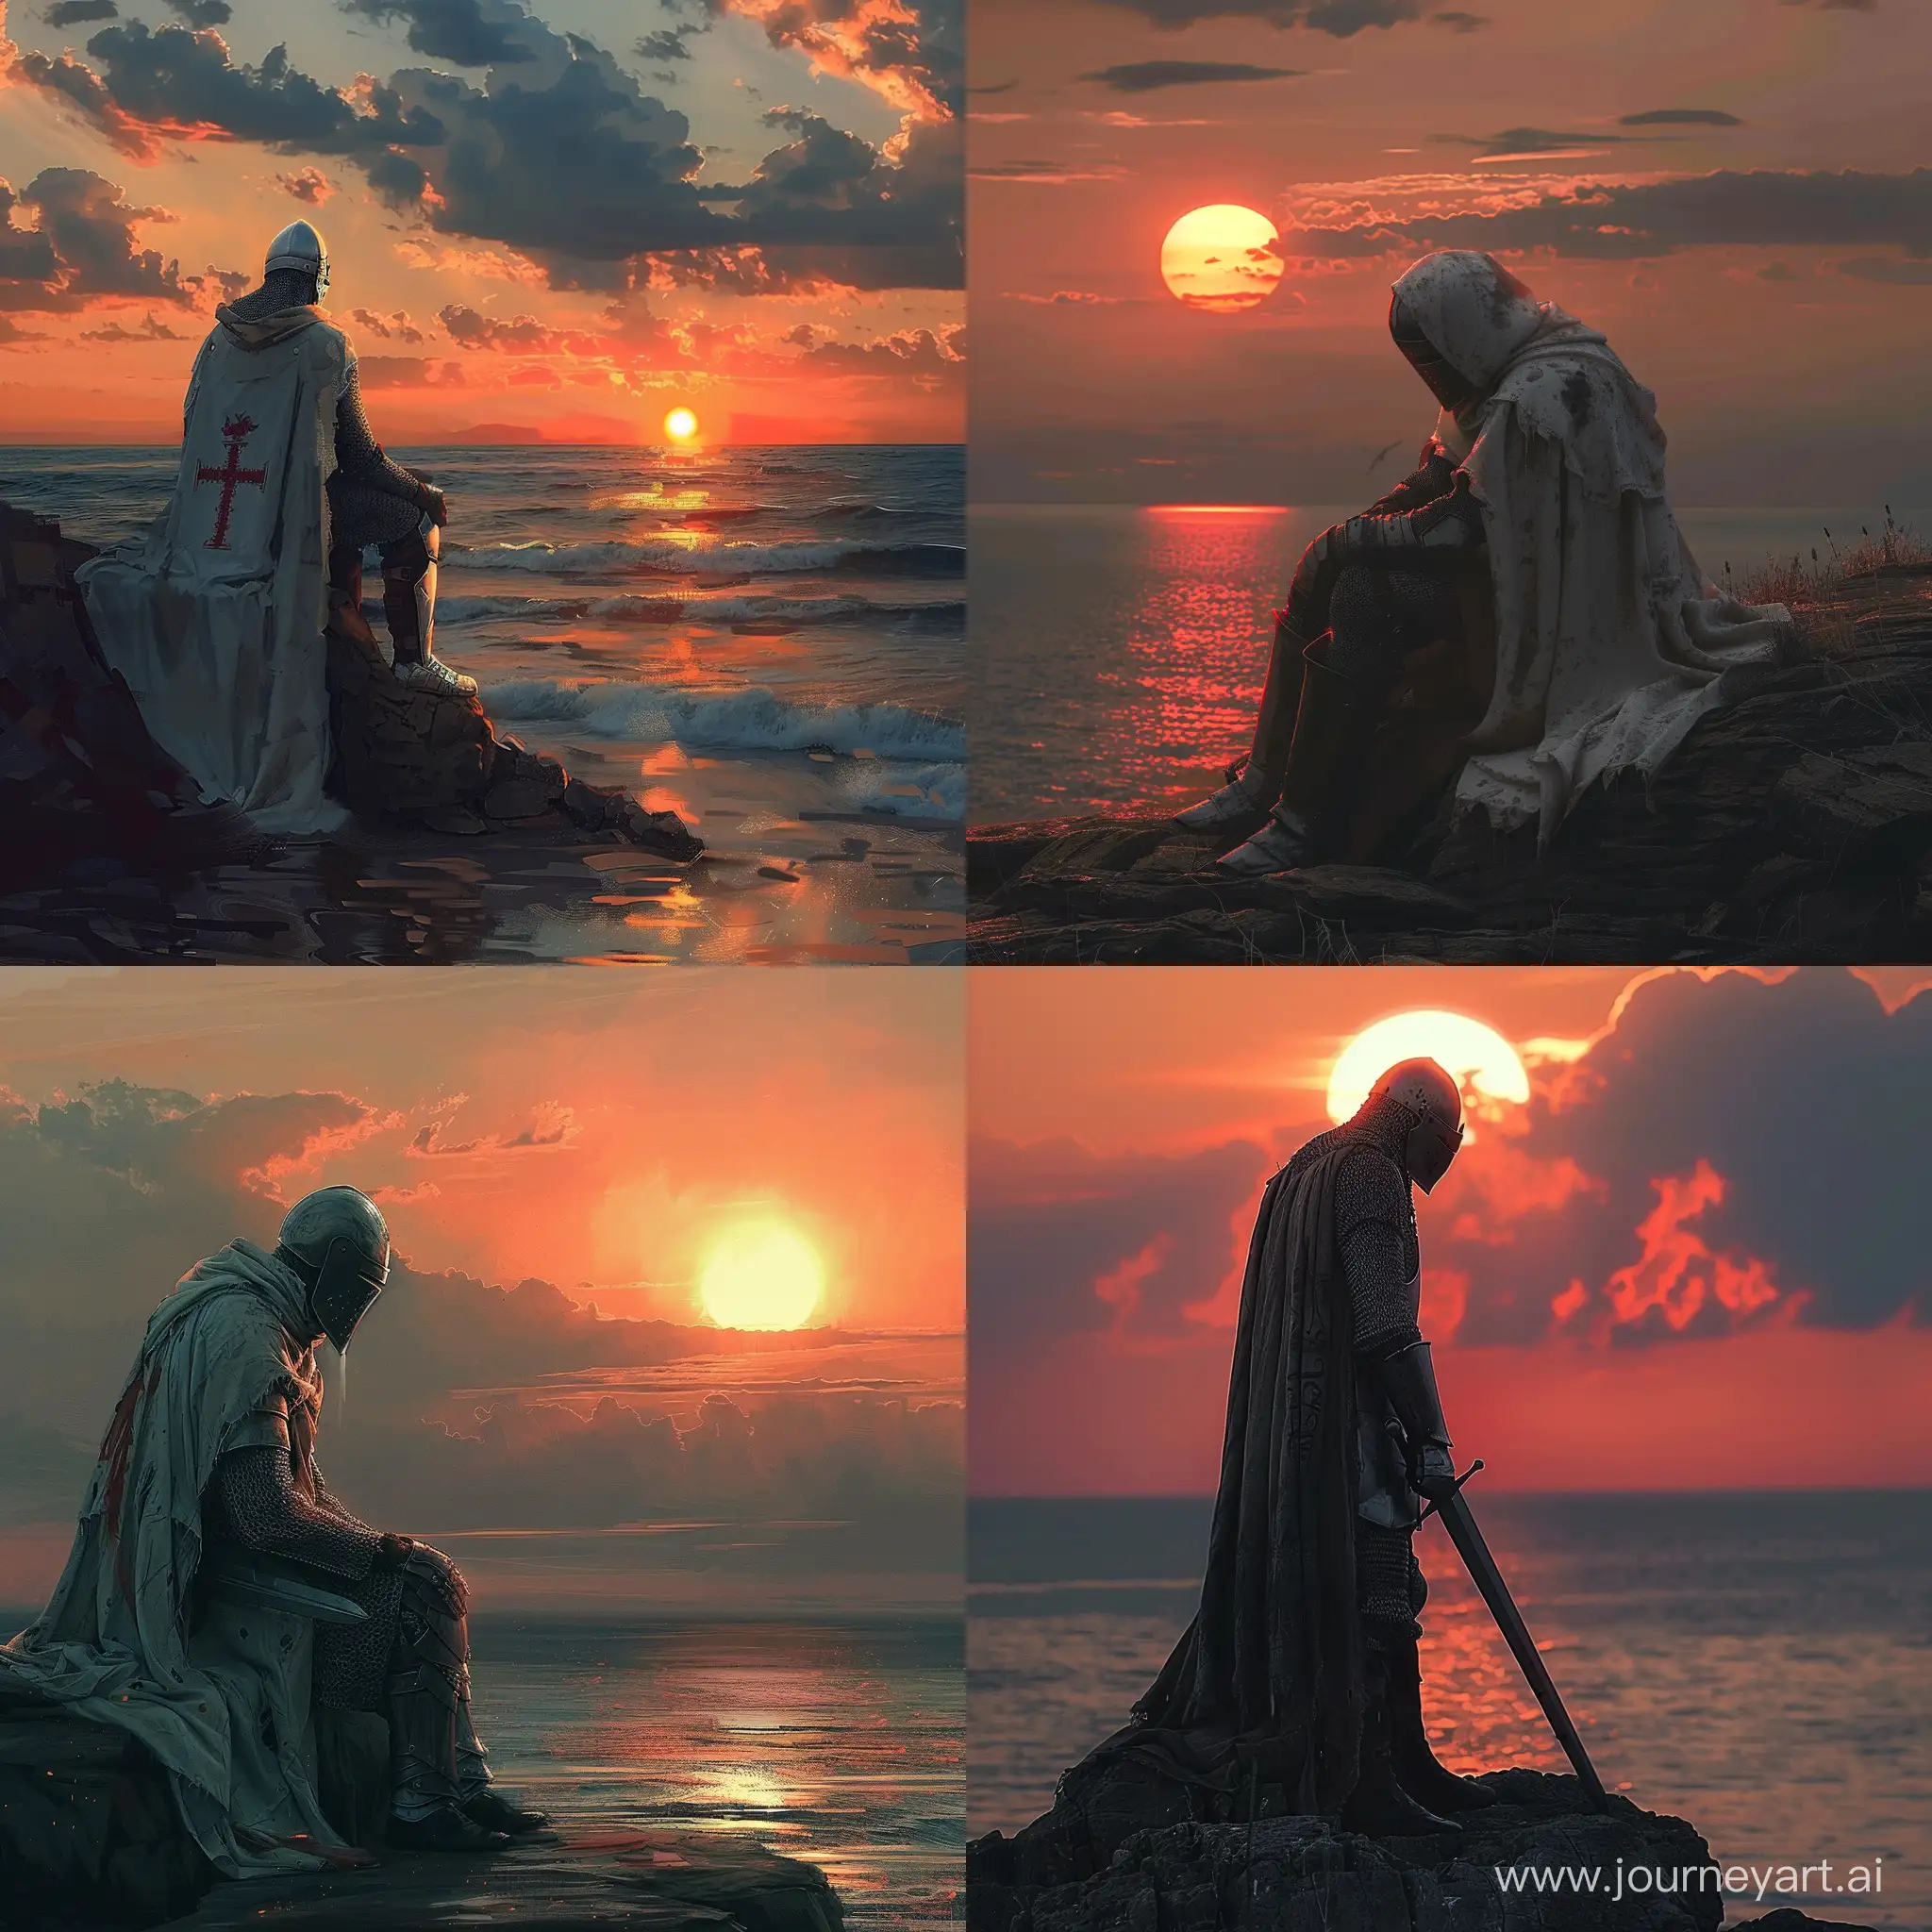 Knight-Crusader-Reflecting-in-Sunset-by-the-Sea-with-a-Touch-of-Sadness